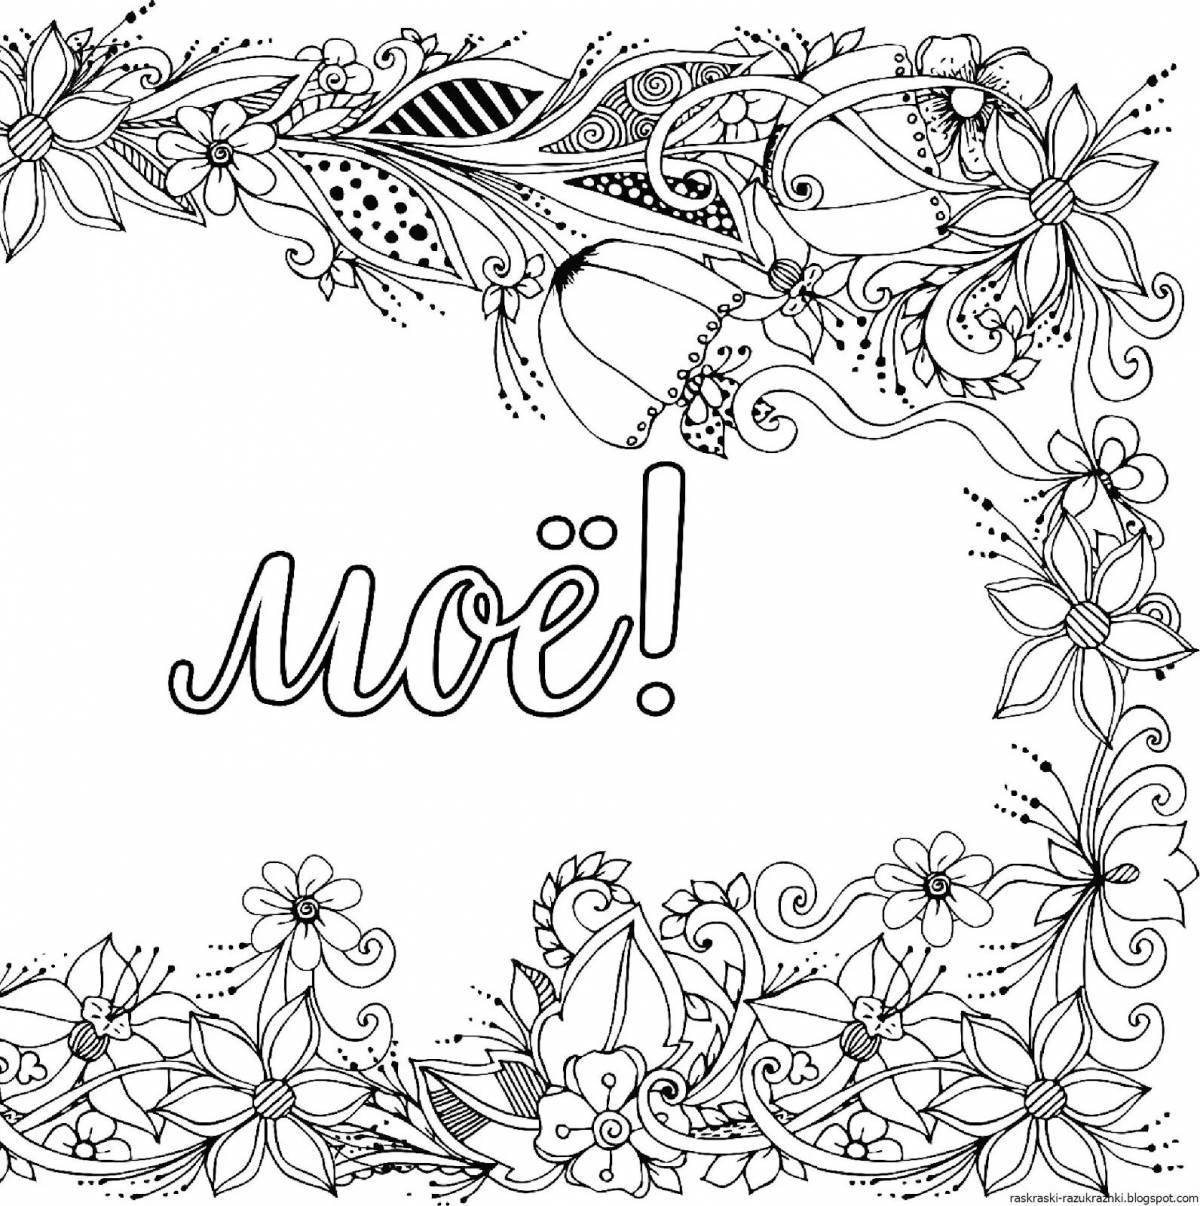 Anti-stress coloring page soothing you irritates me